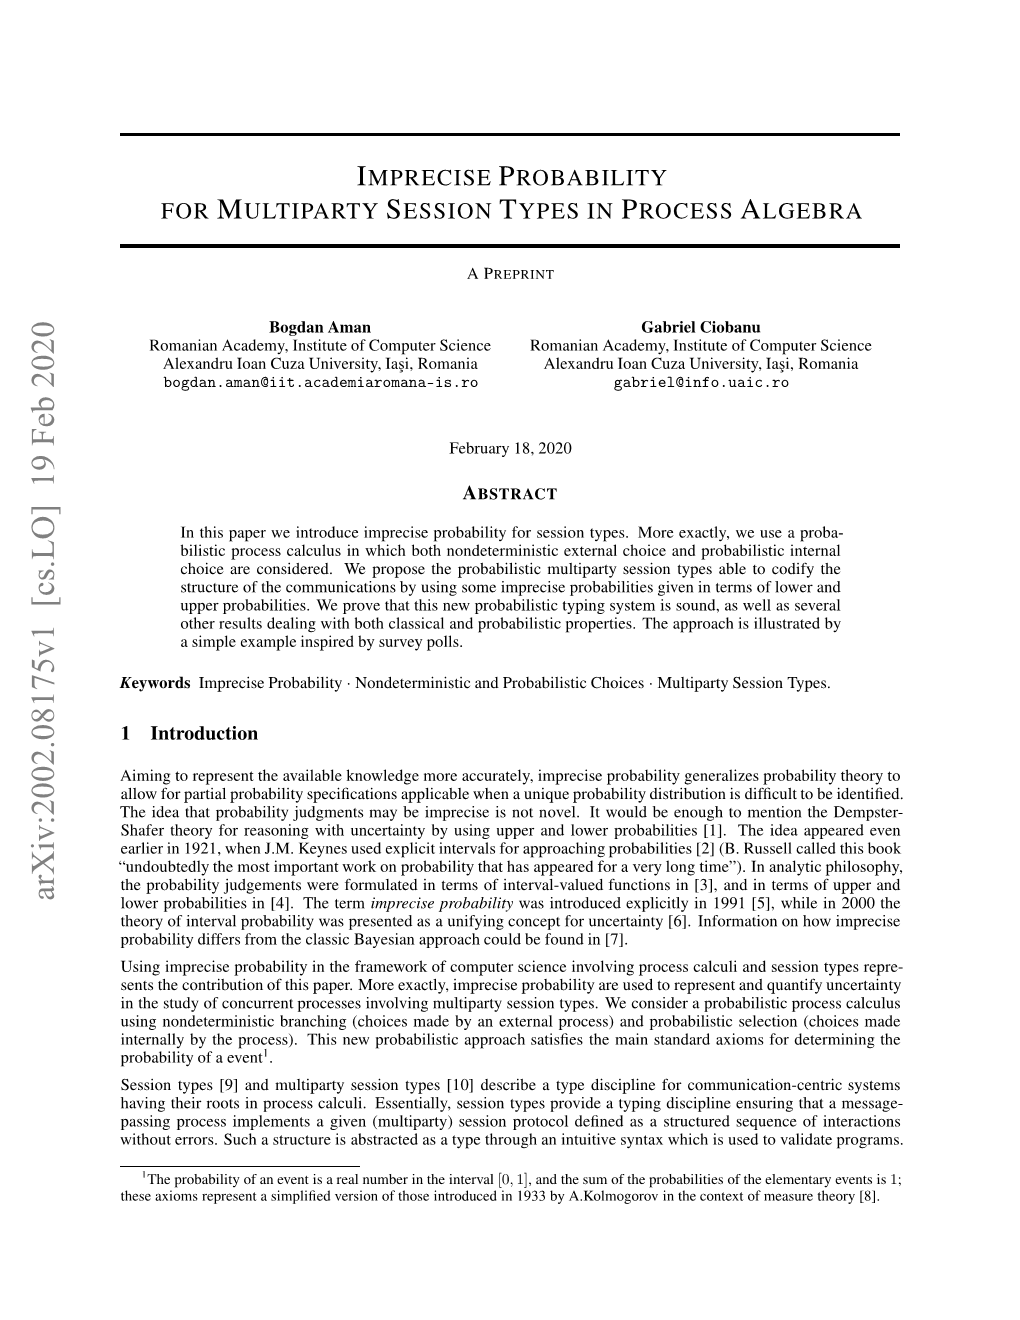 Imprecise Probability for Multiparty Session Types in Process Algebra APREPRINT